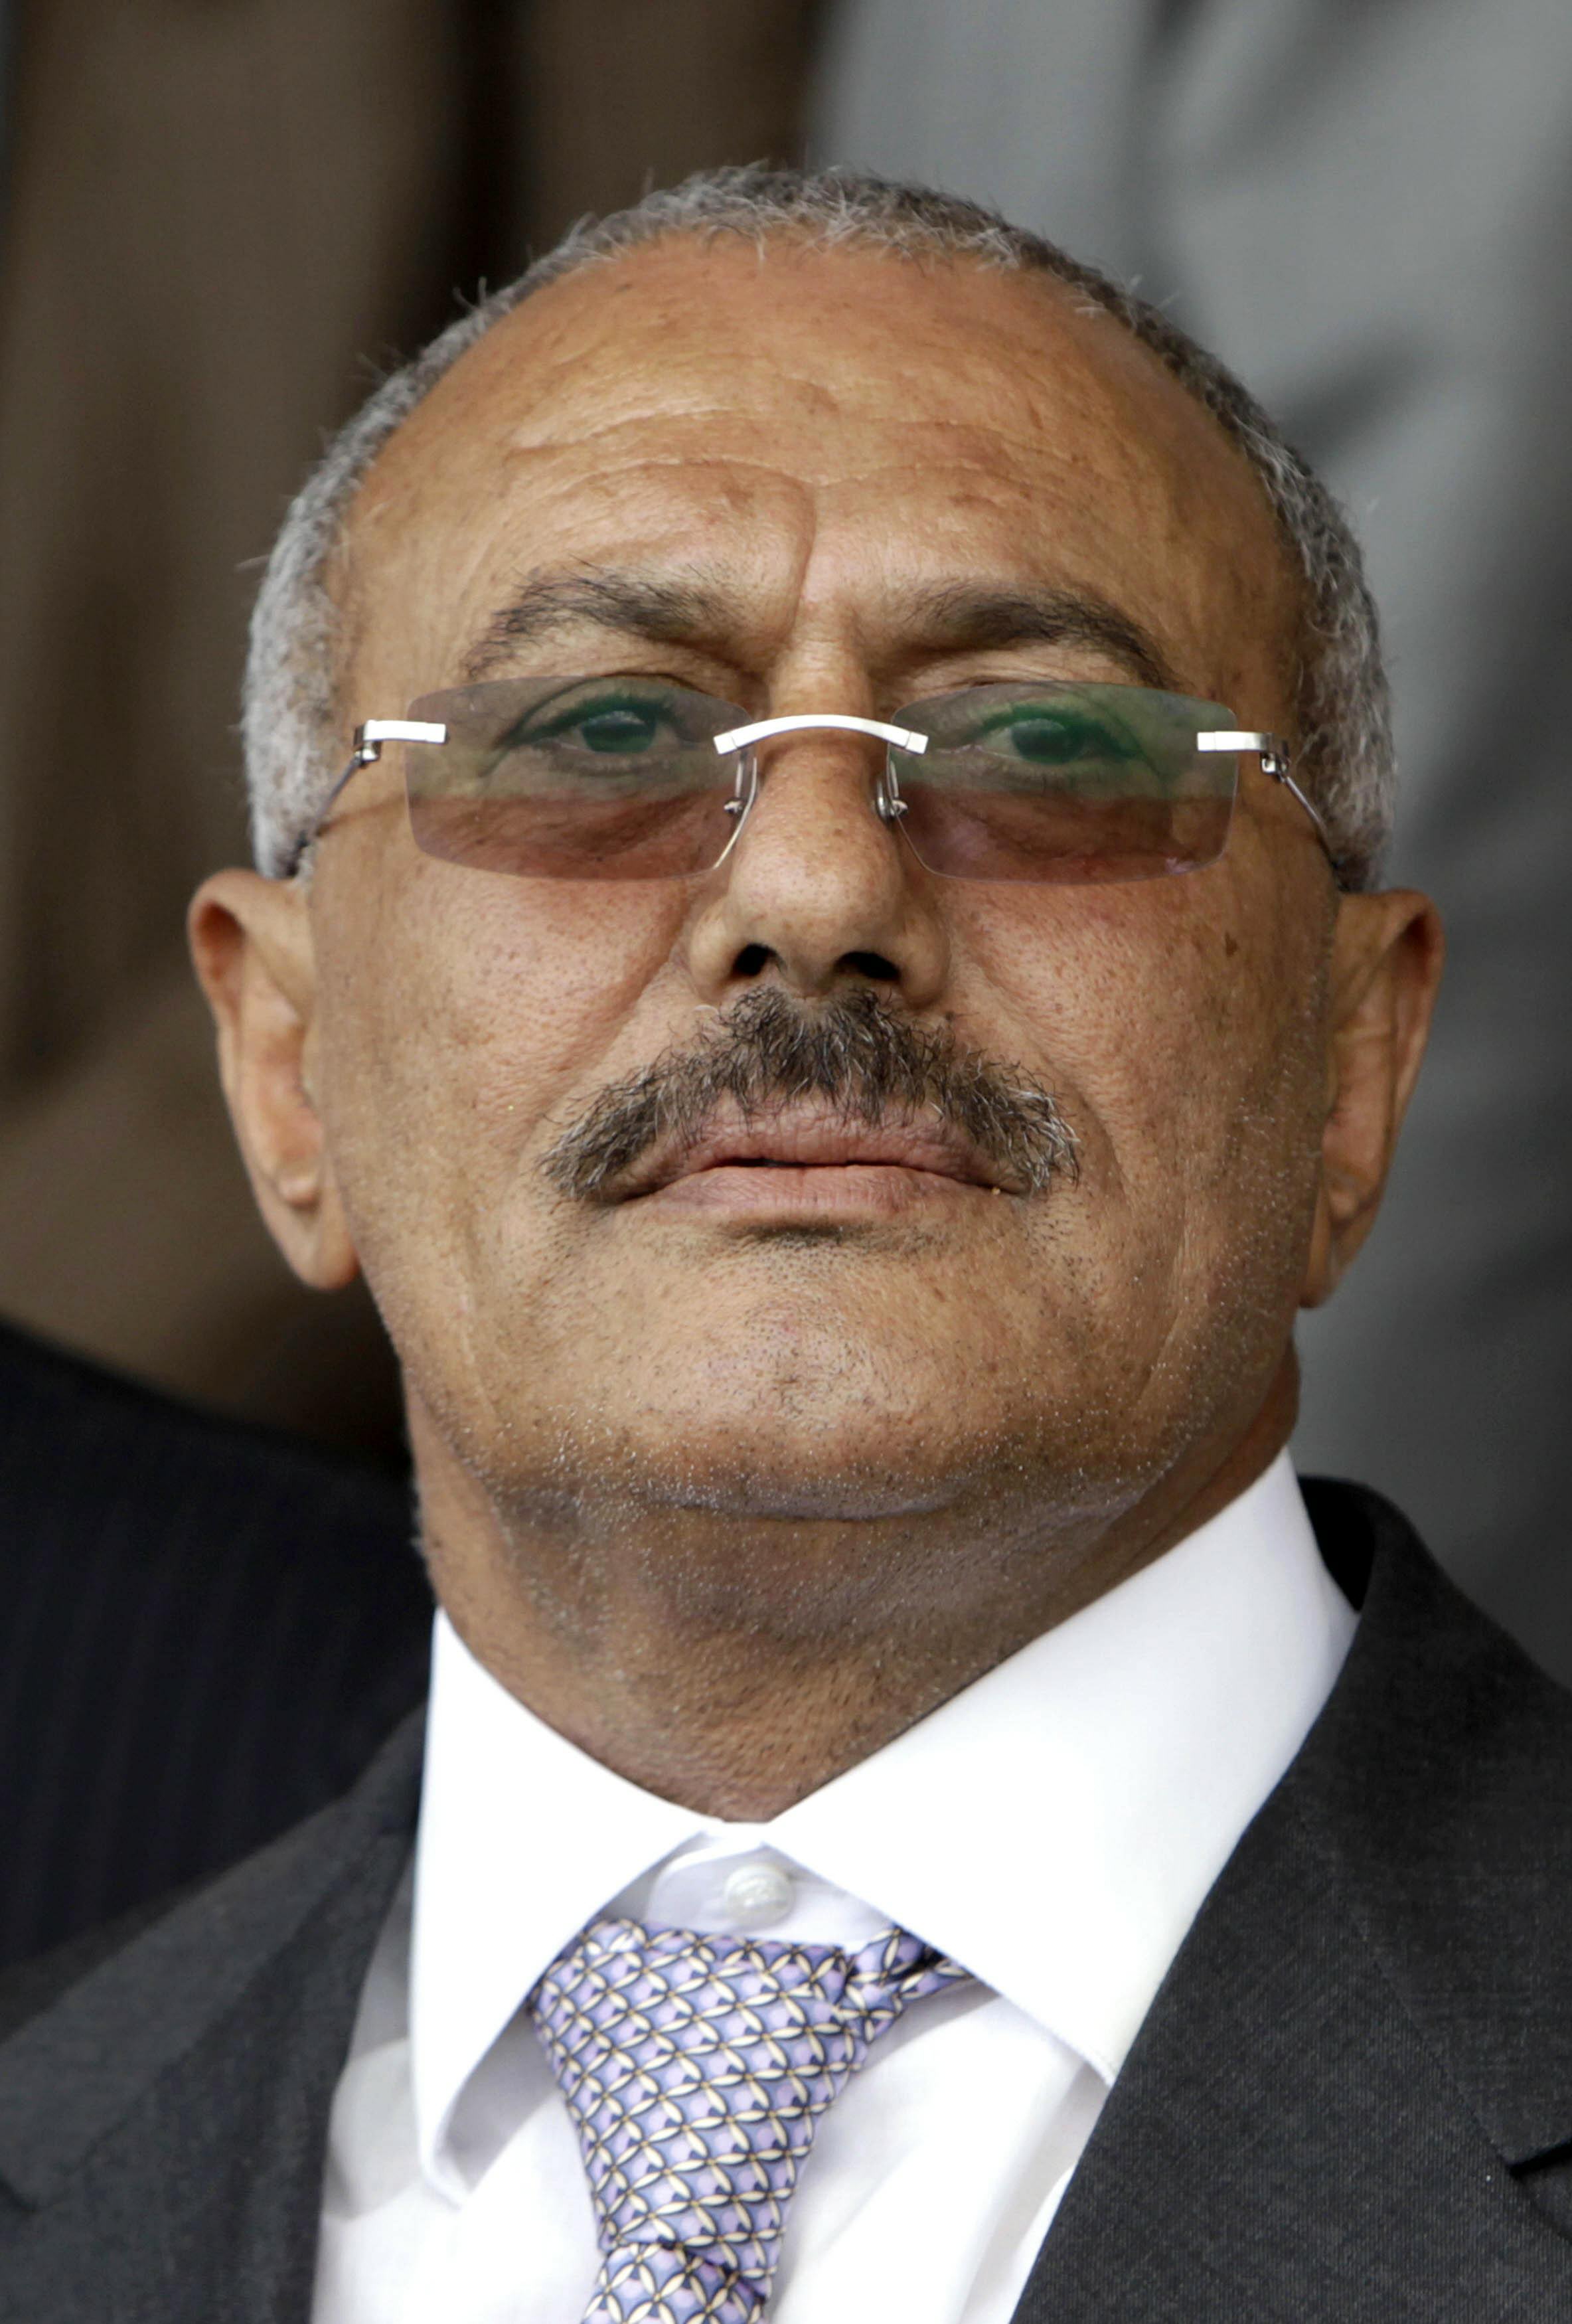 Yemen: Ex-president Saleh says could work with Russia to 'fight terrorism'